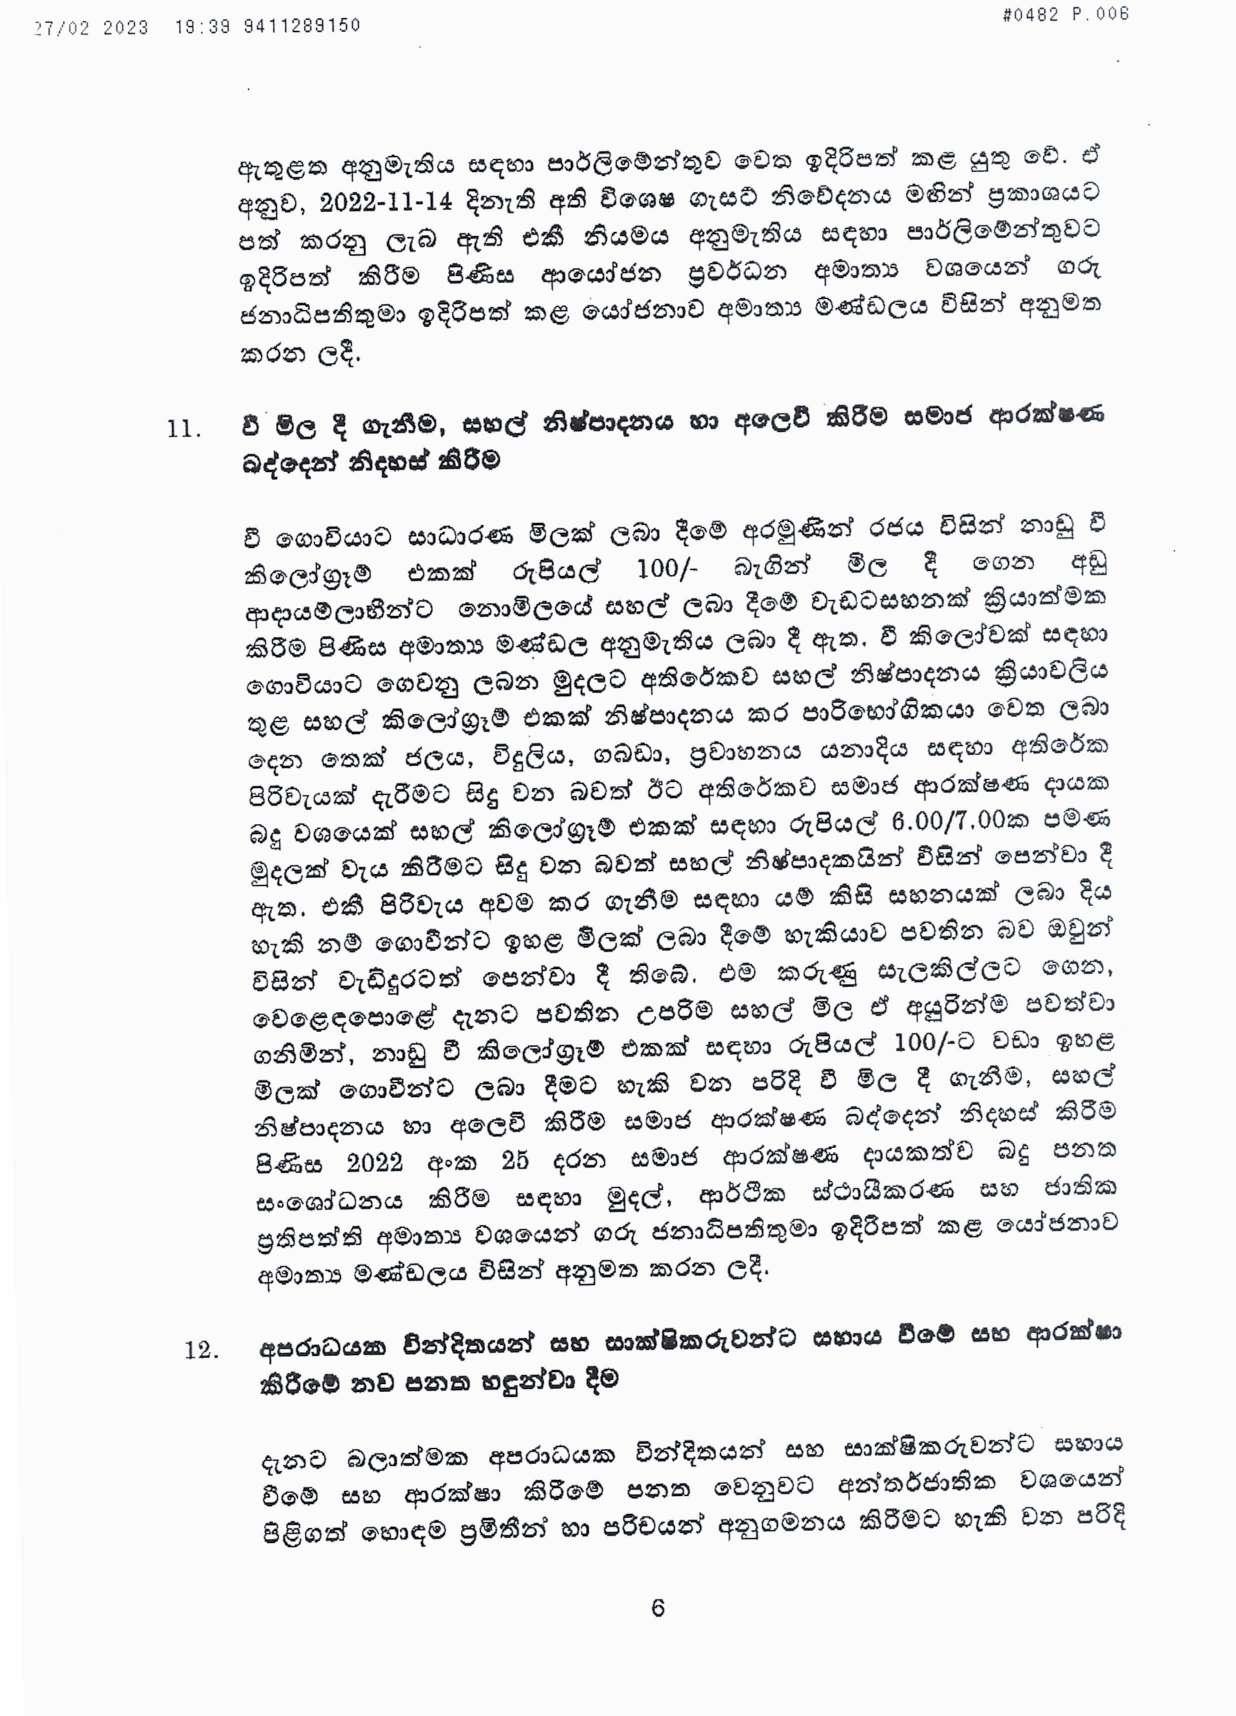 Cabinet Decision on 27.07.2023 1 page 006